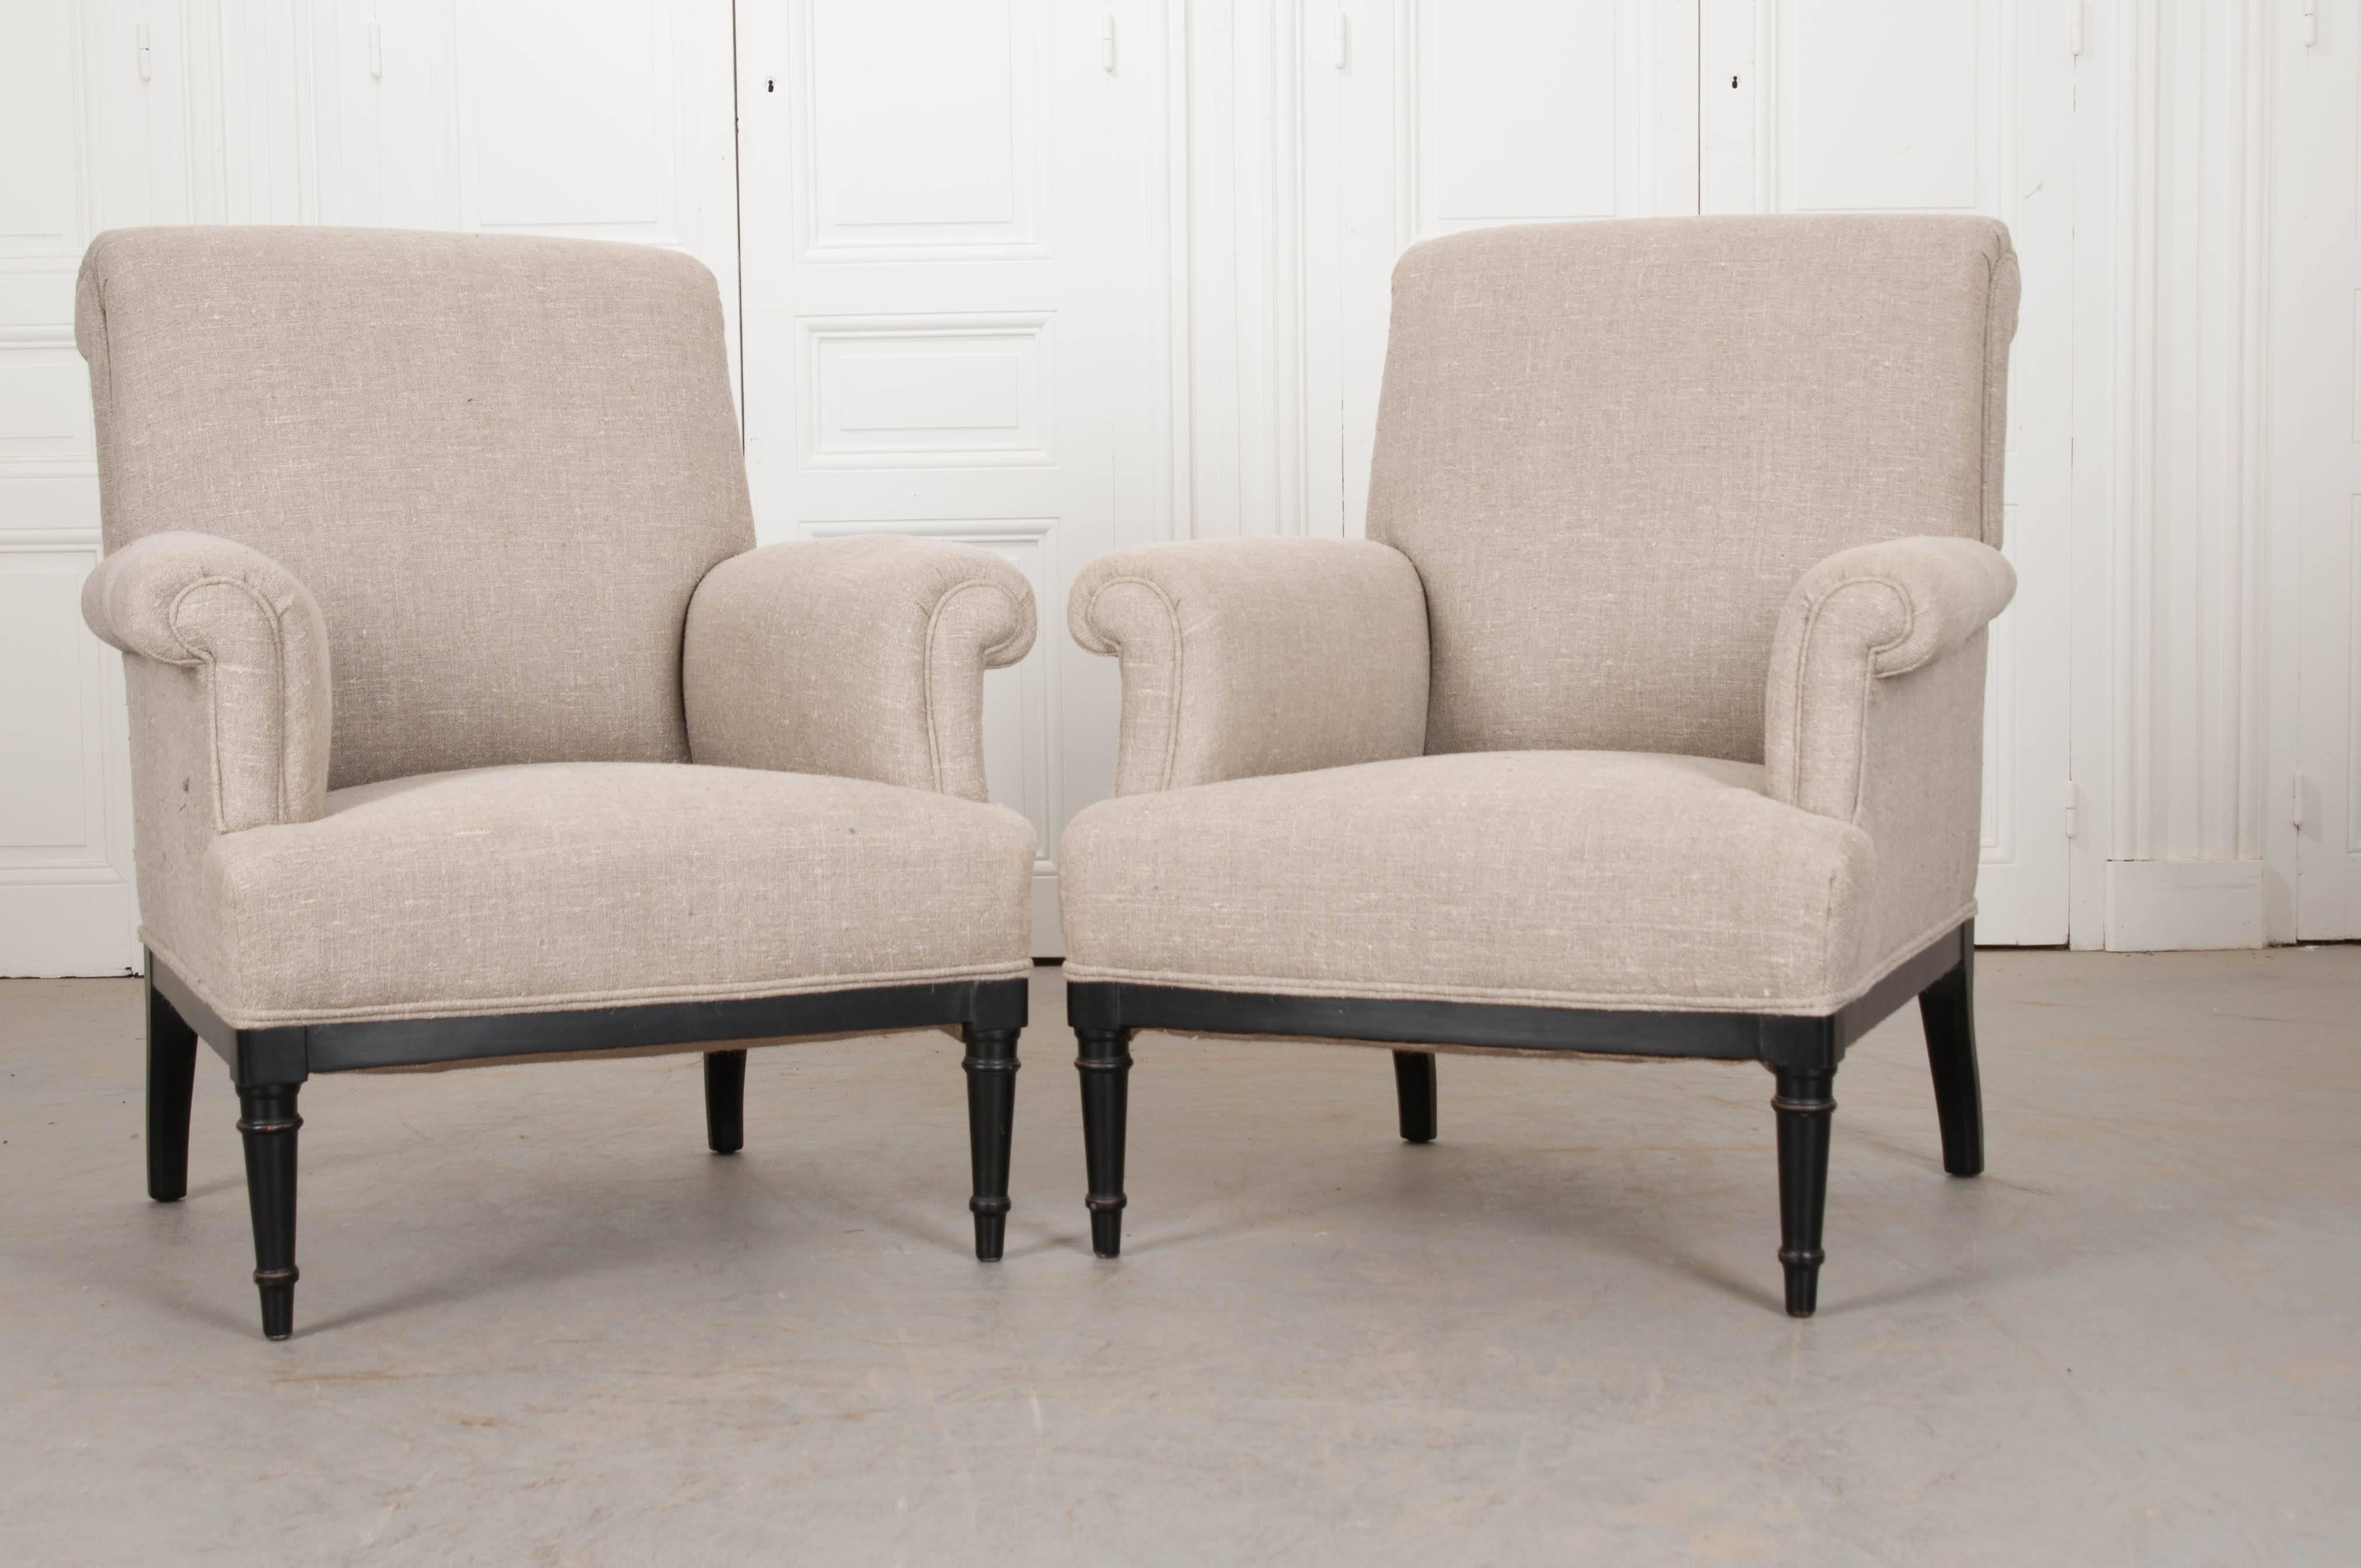 Ebonized Pair of 19th Century French Upholstered Bergères